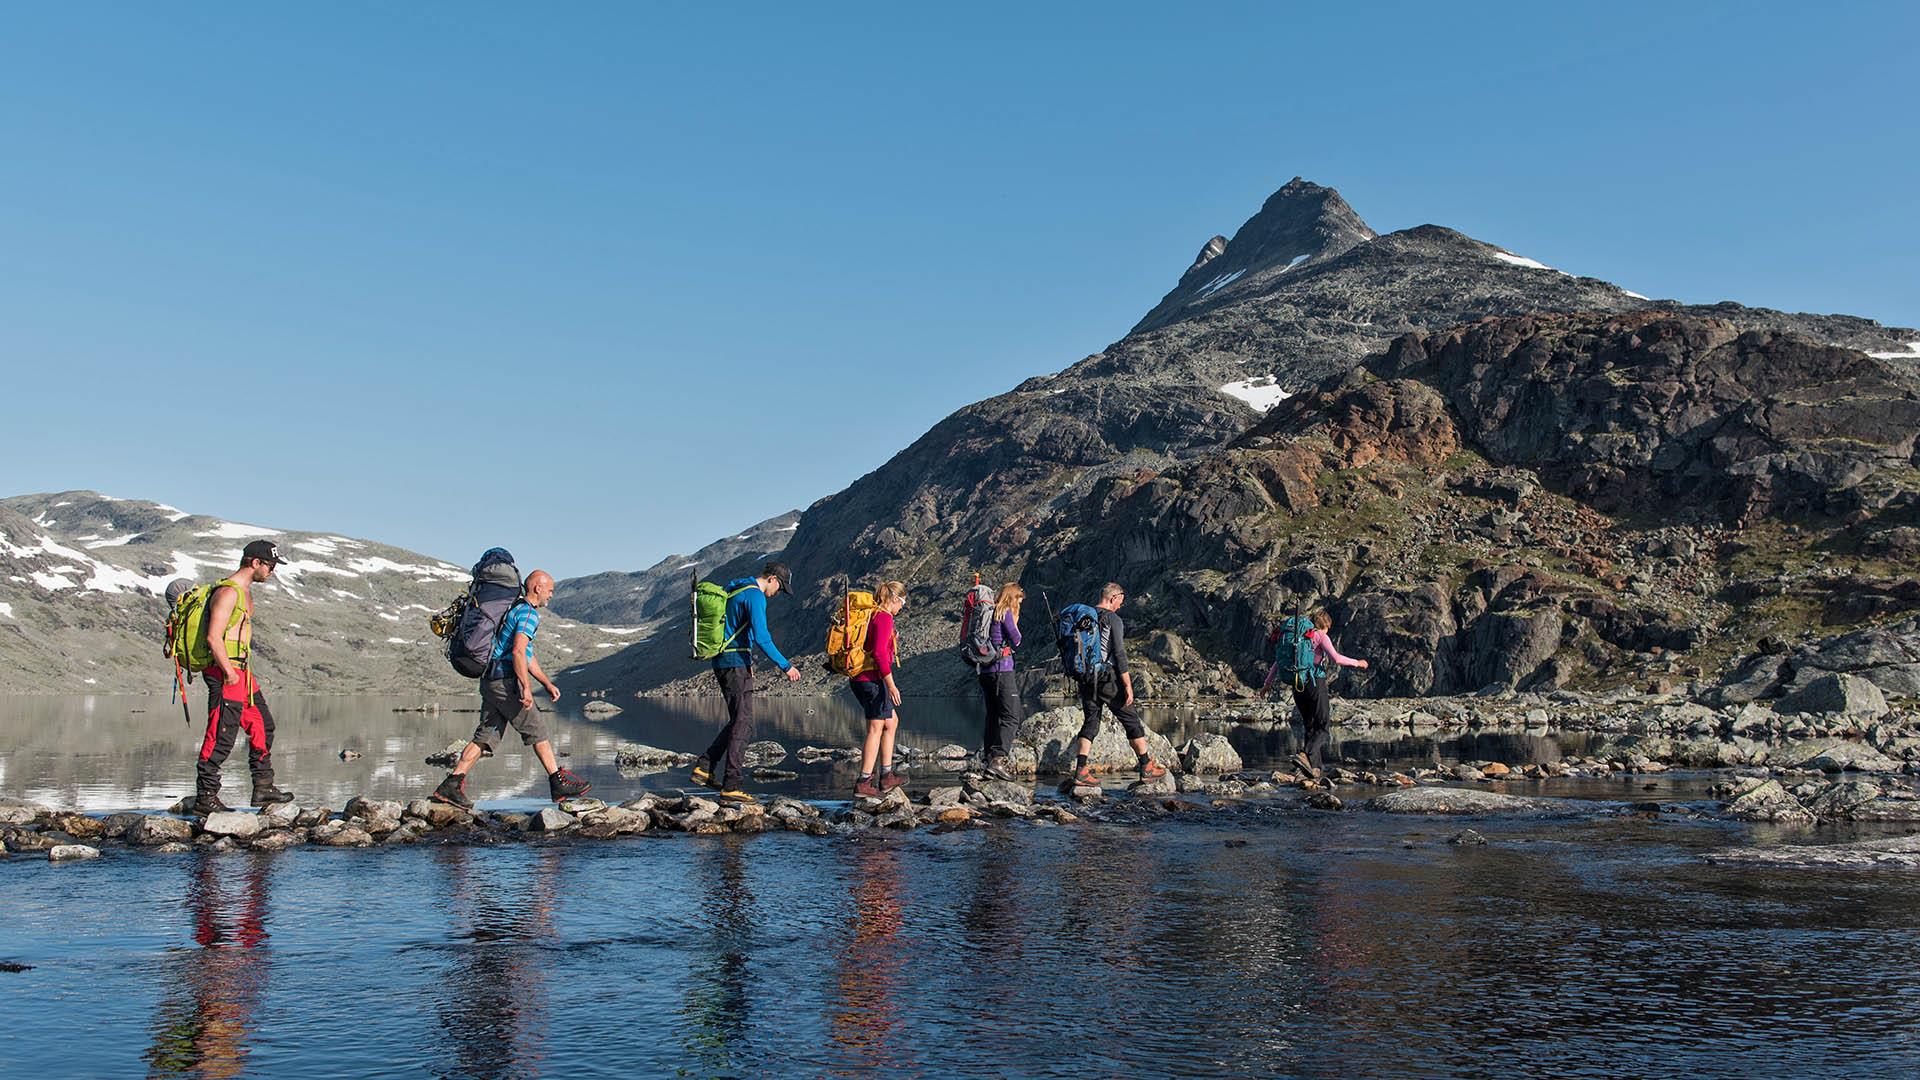 A group of hikers cross over a river on rocks in barren high mountain landscape with a high mountain in the background.